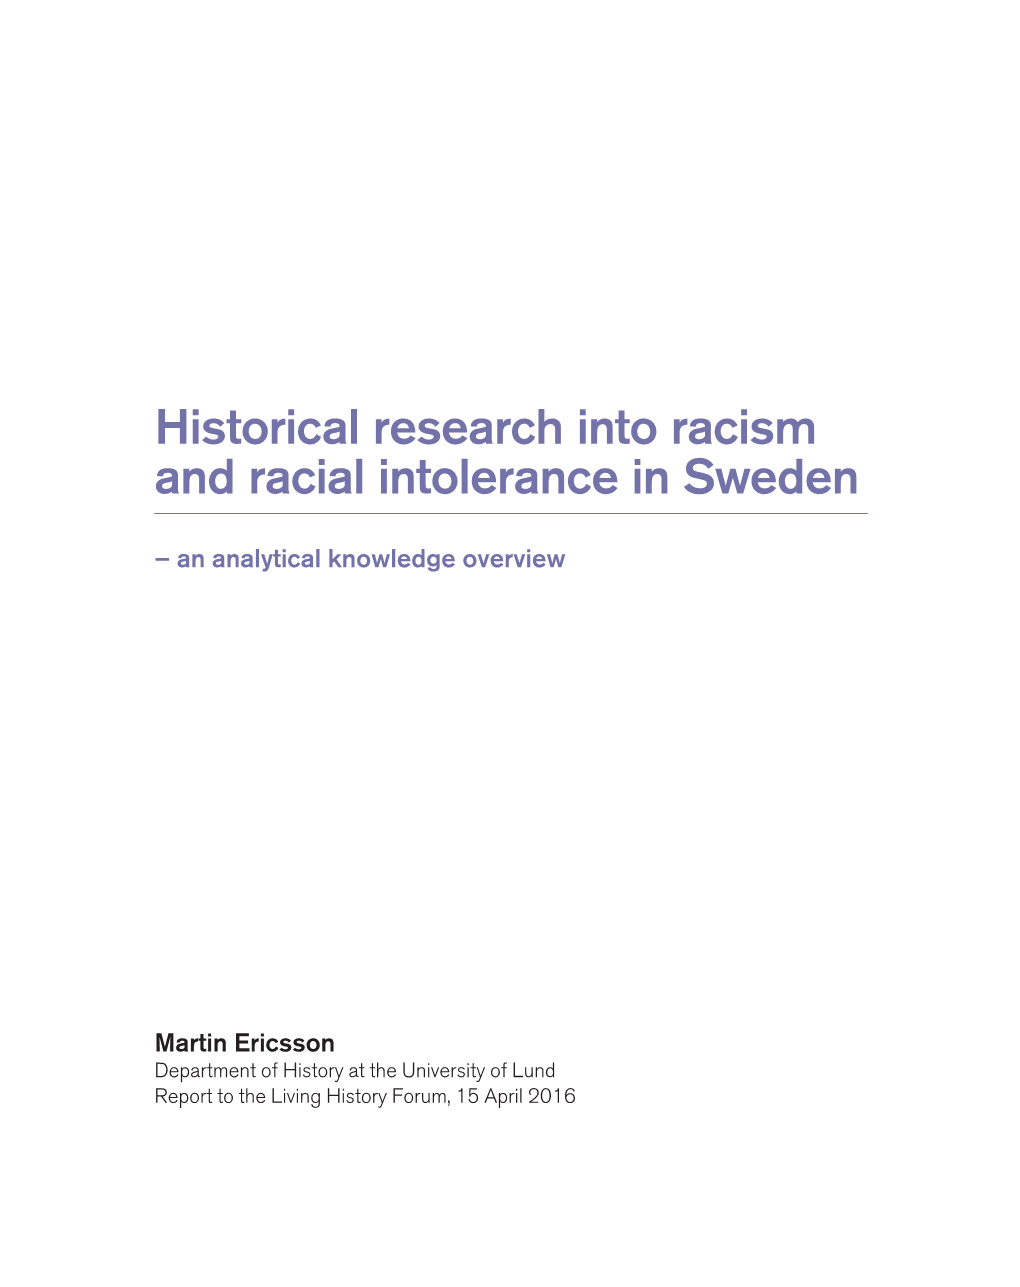 Historical Research Into Racism and Racial Intolerance in Sweden